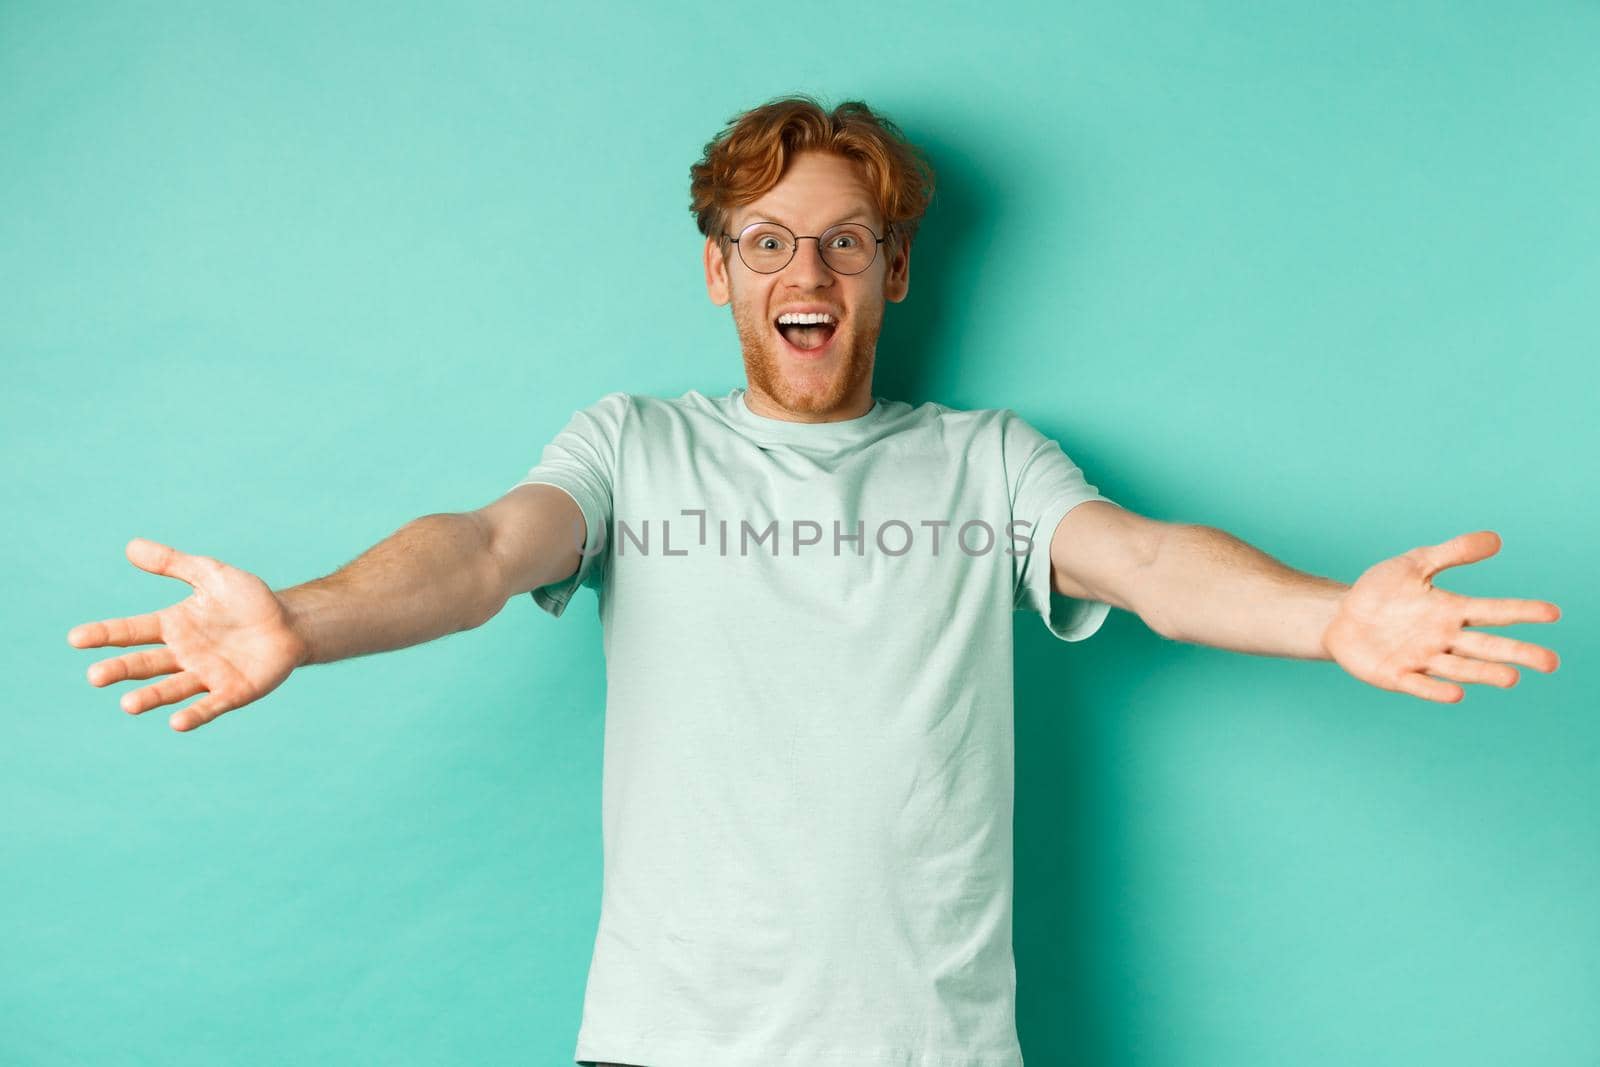 Excited young redhead guy in glasses strethced out hands in warm welcome, invite you and smile friendly at camera, standing happy over turquoise background.